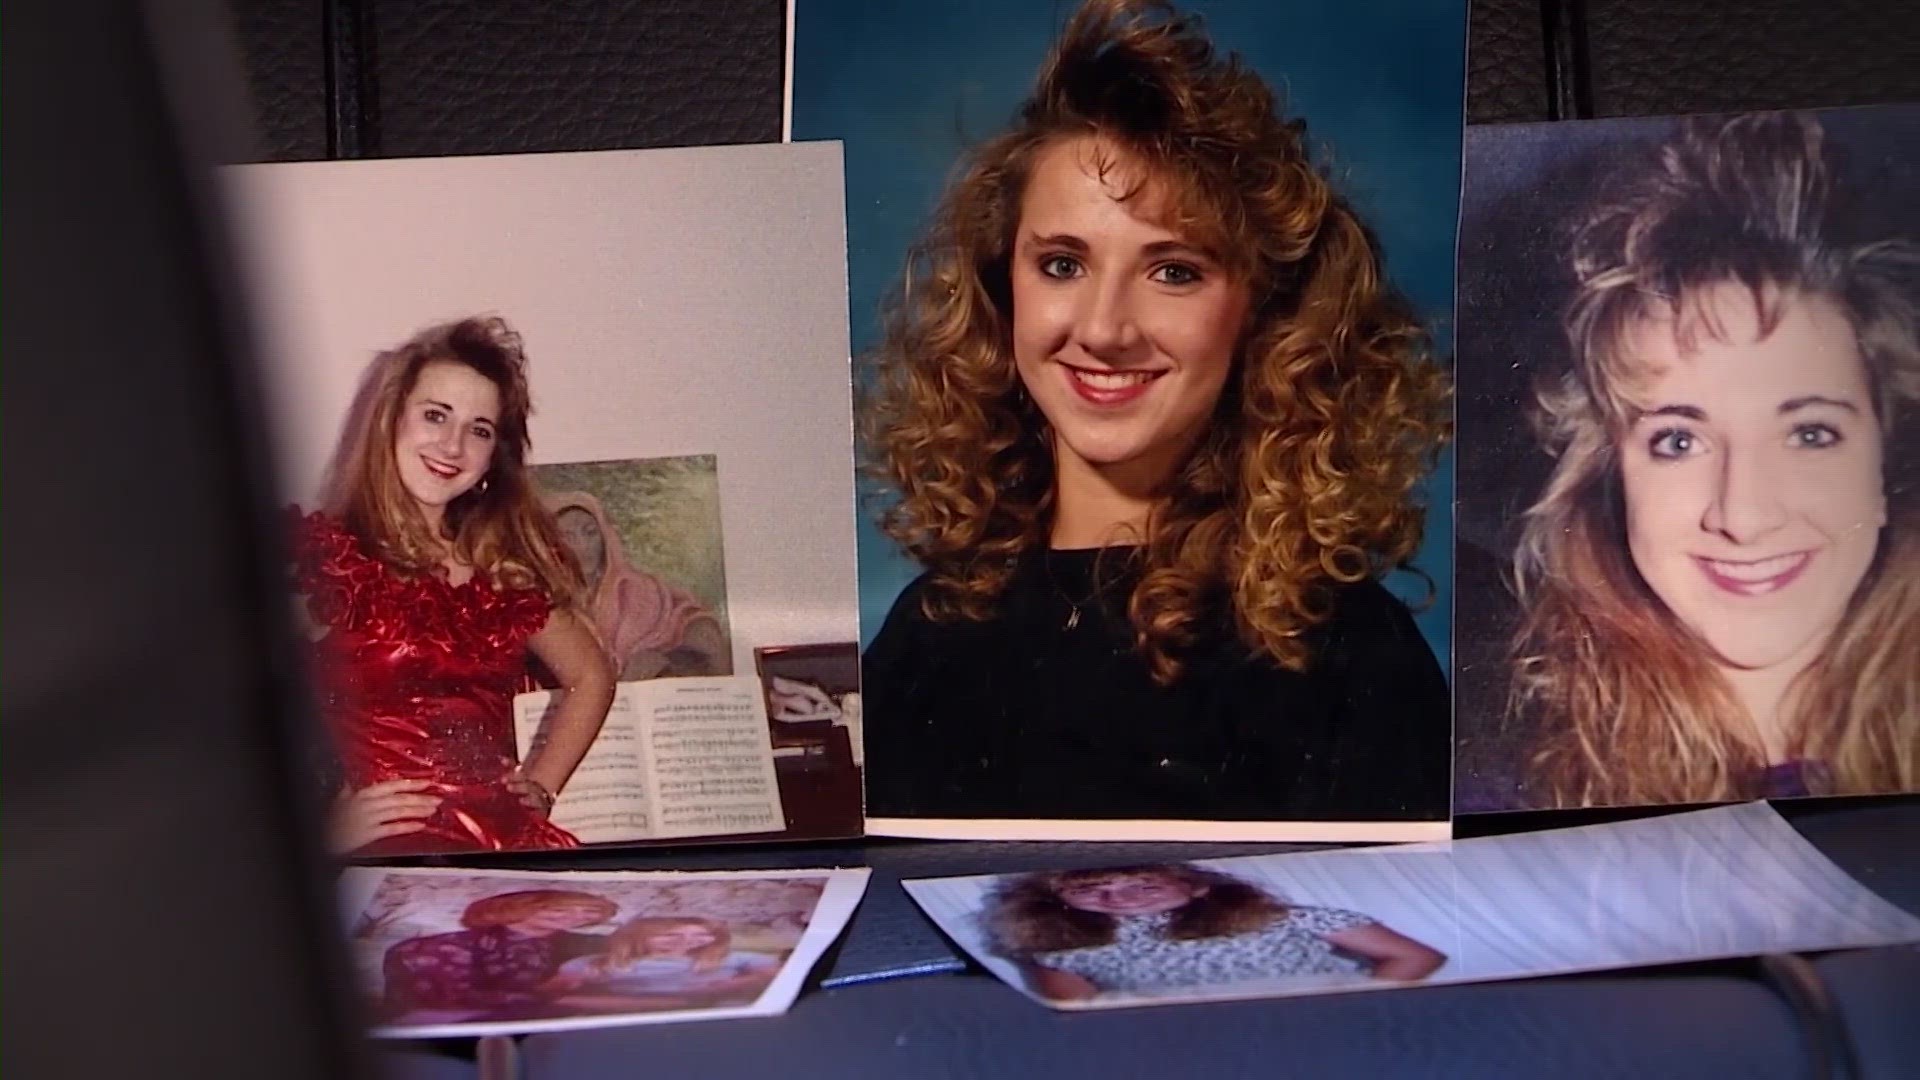 Natasha Atchley, 19, was found burned to death in the back of her car in San Jacinto County in 1992.